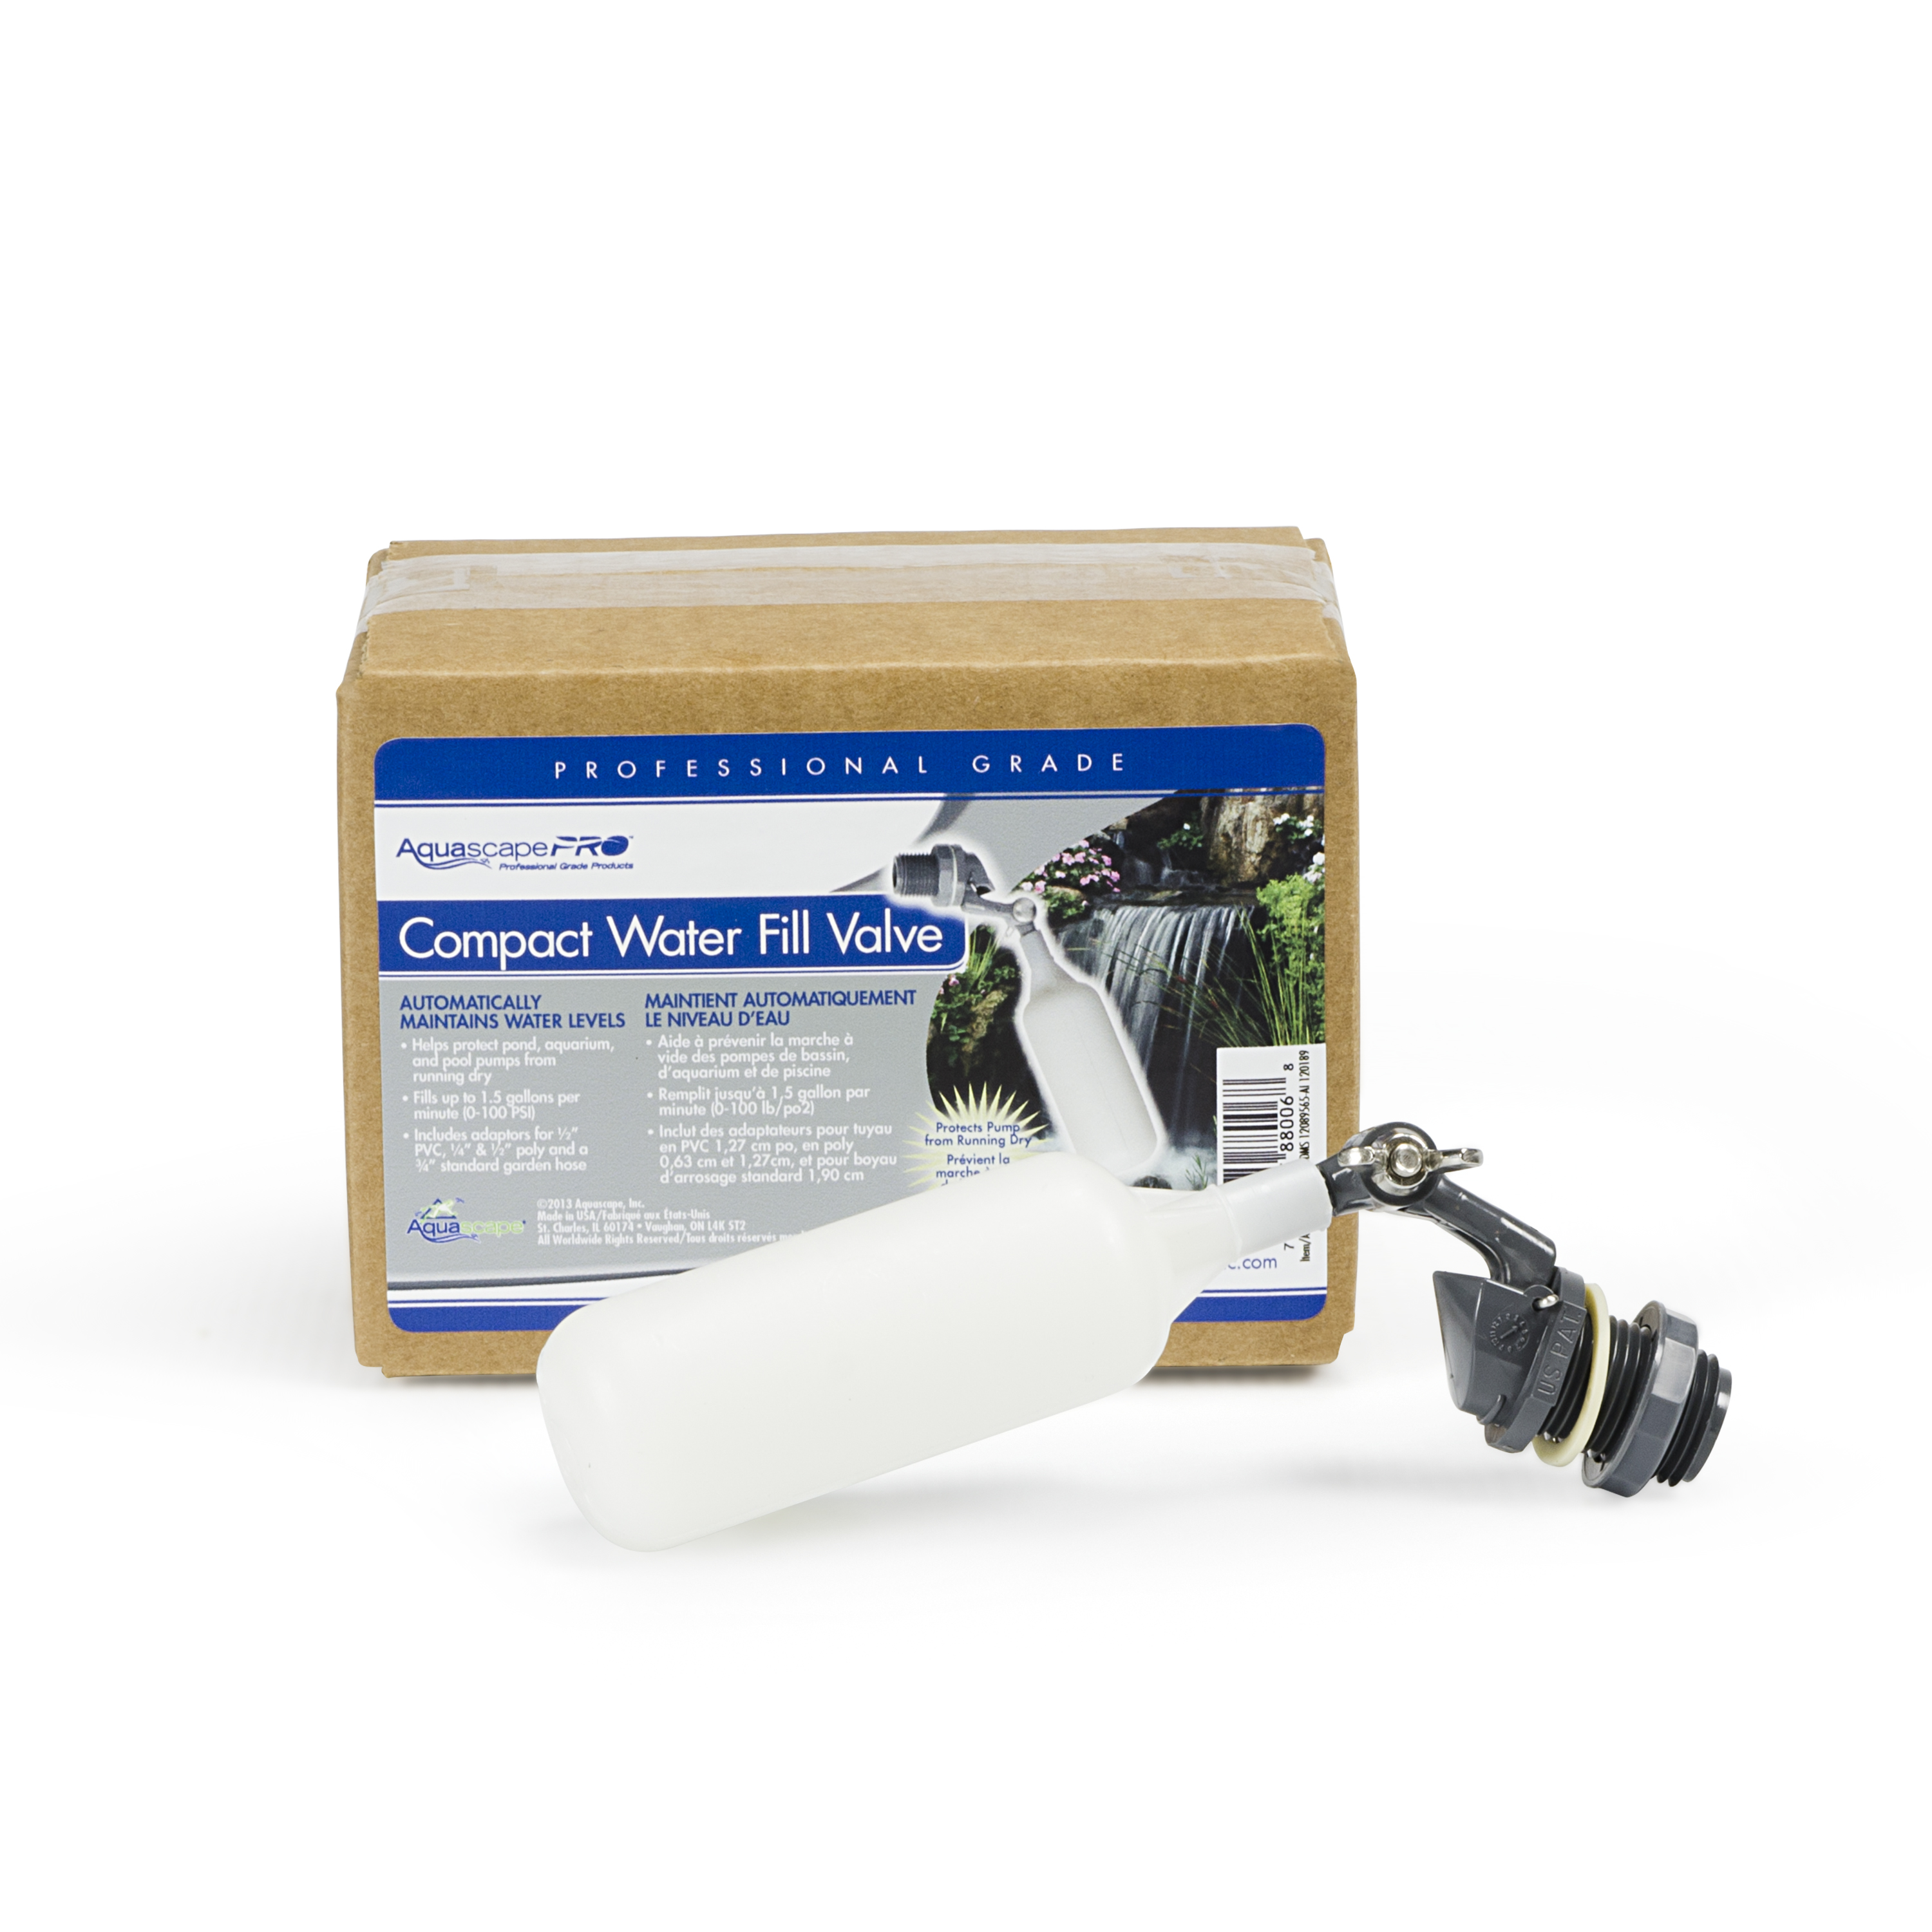 Aquascape Compact Water Fill Valve for pond water level